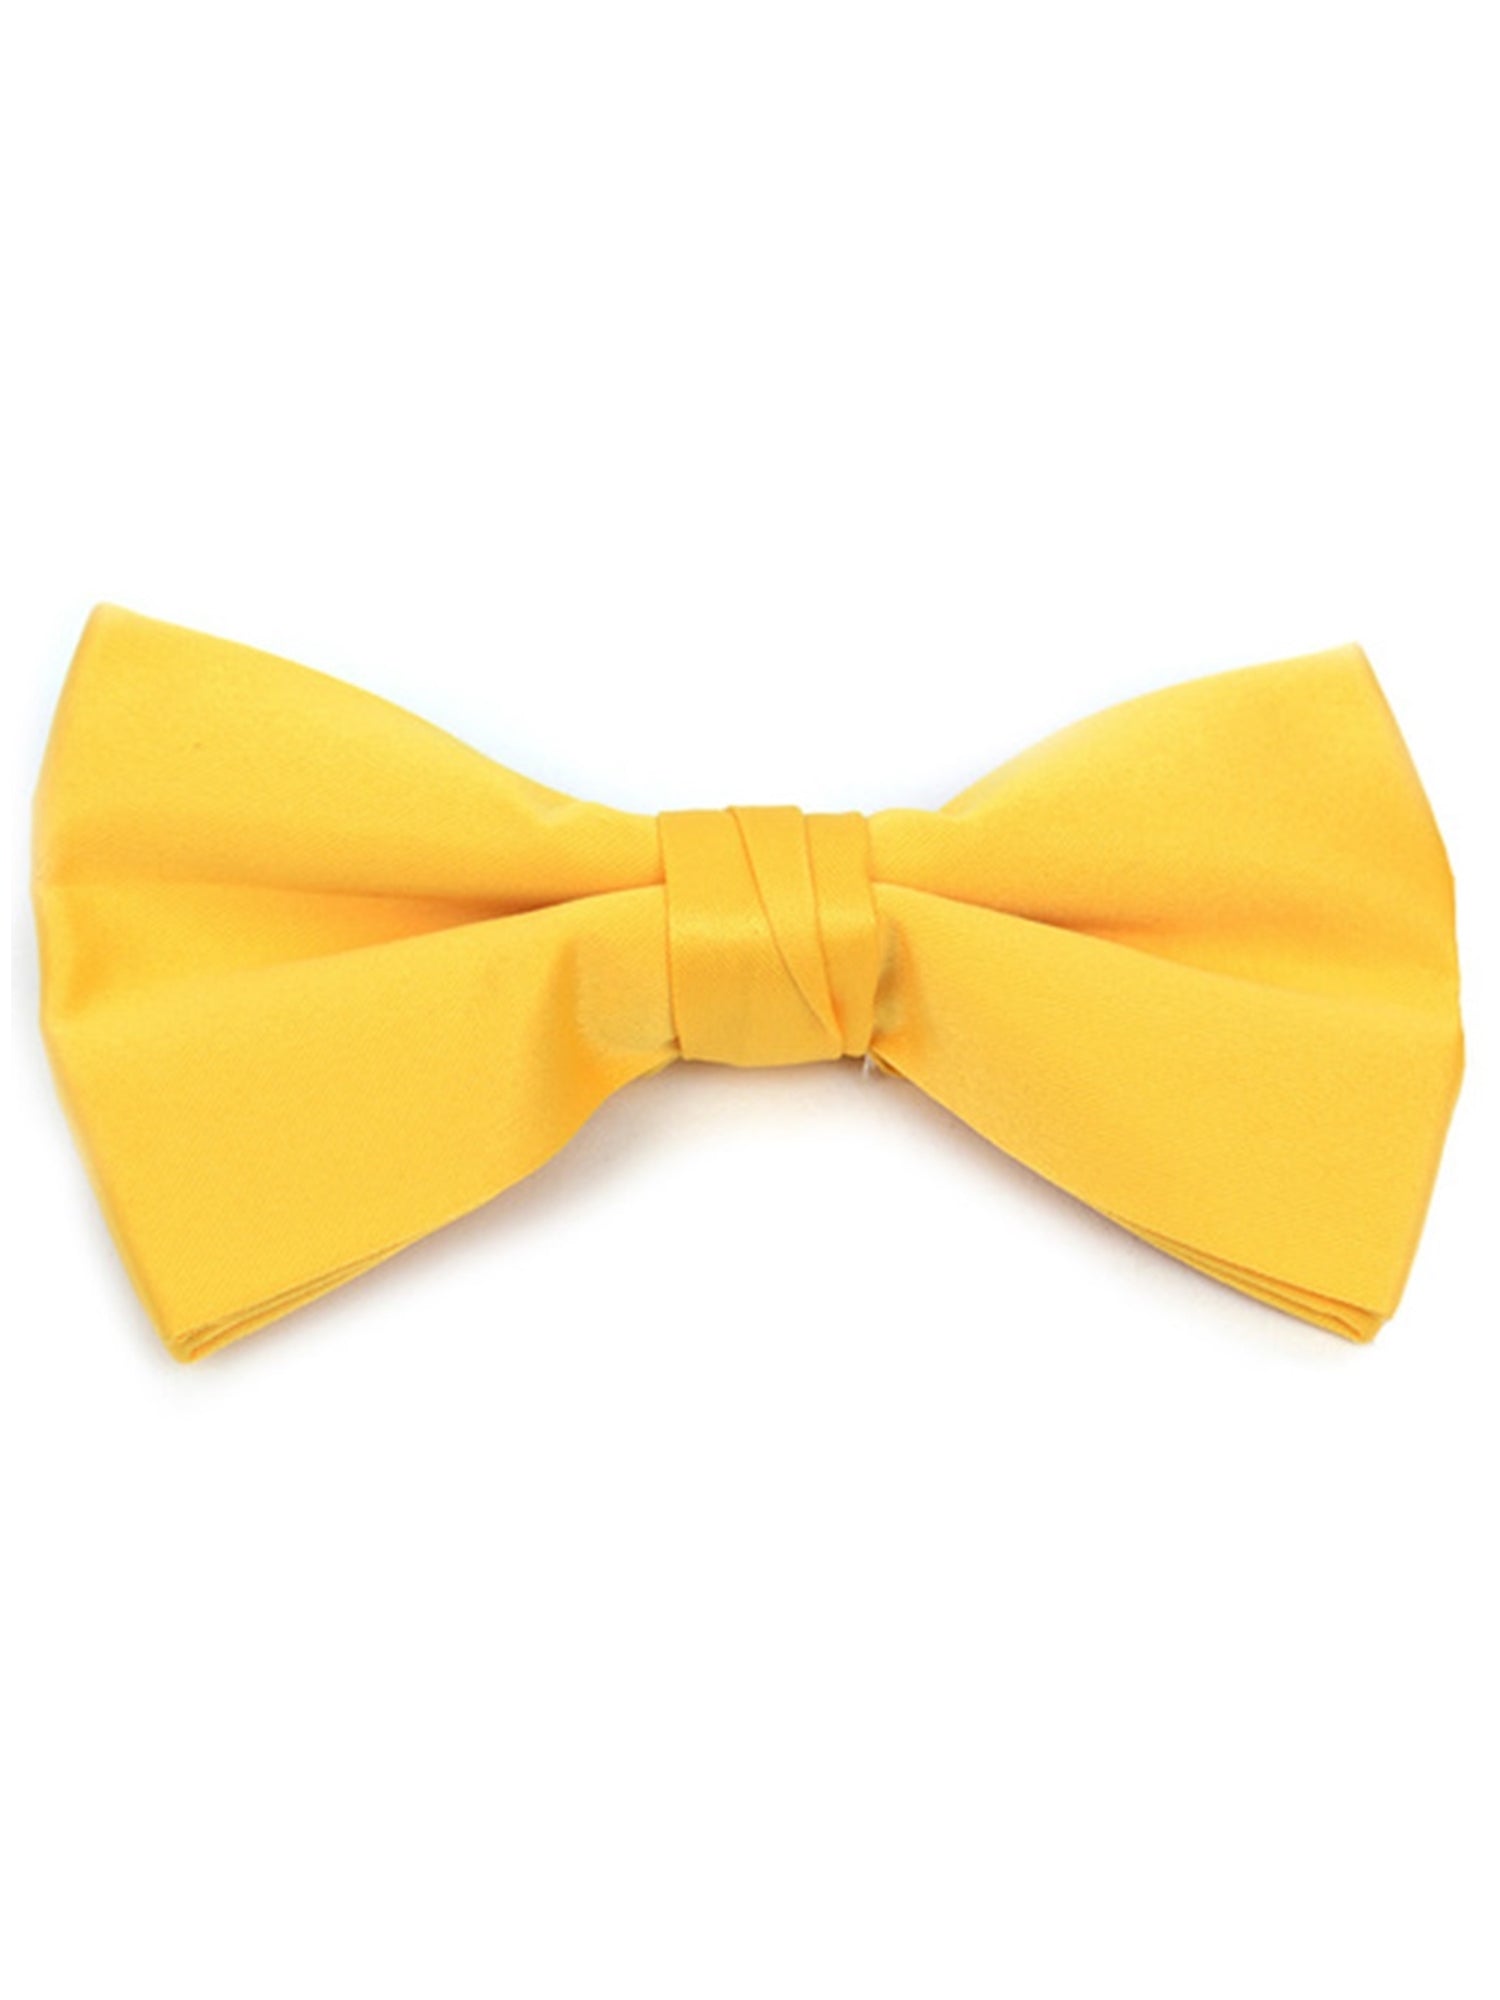 Young Boy's Pre-tied Clip On Bow Tie - Formal Tuxedo Solid Color Boy's Solid Color Bow Tie TheDapperTie Yellow One Size 